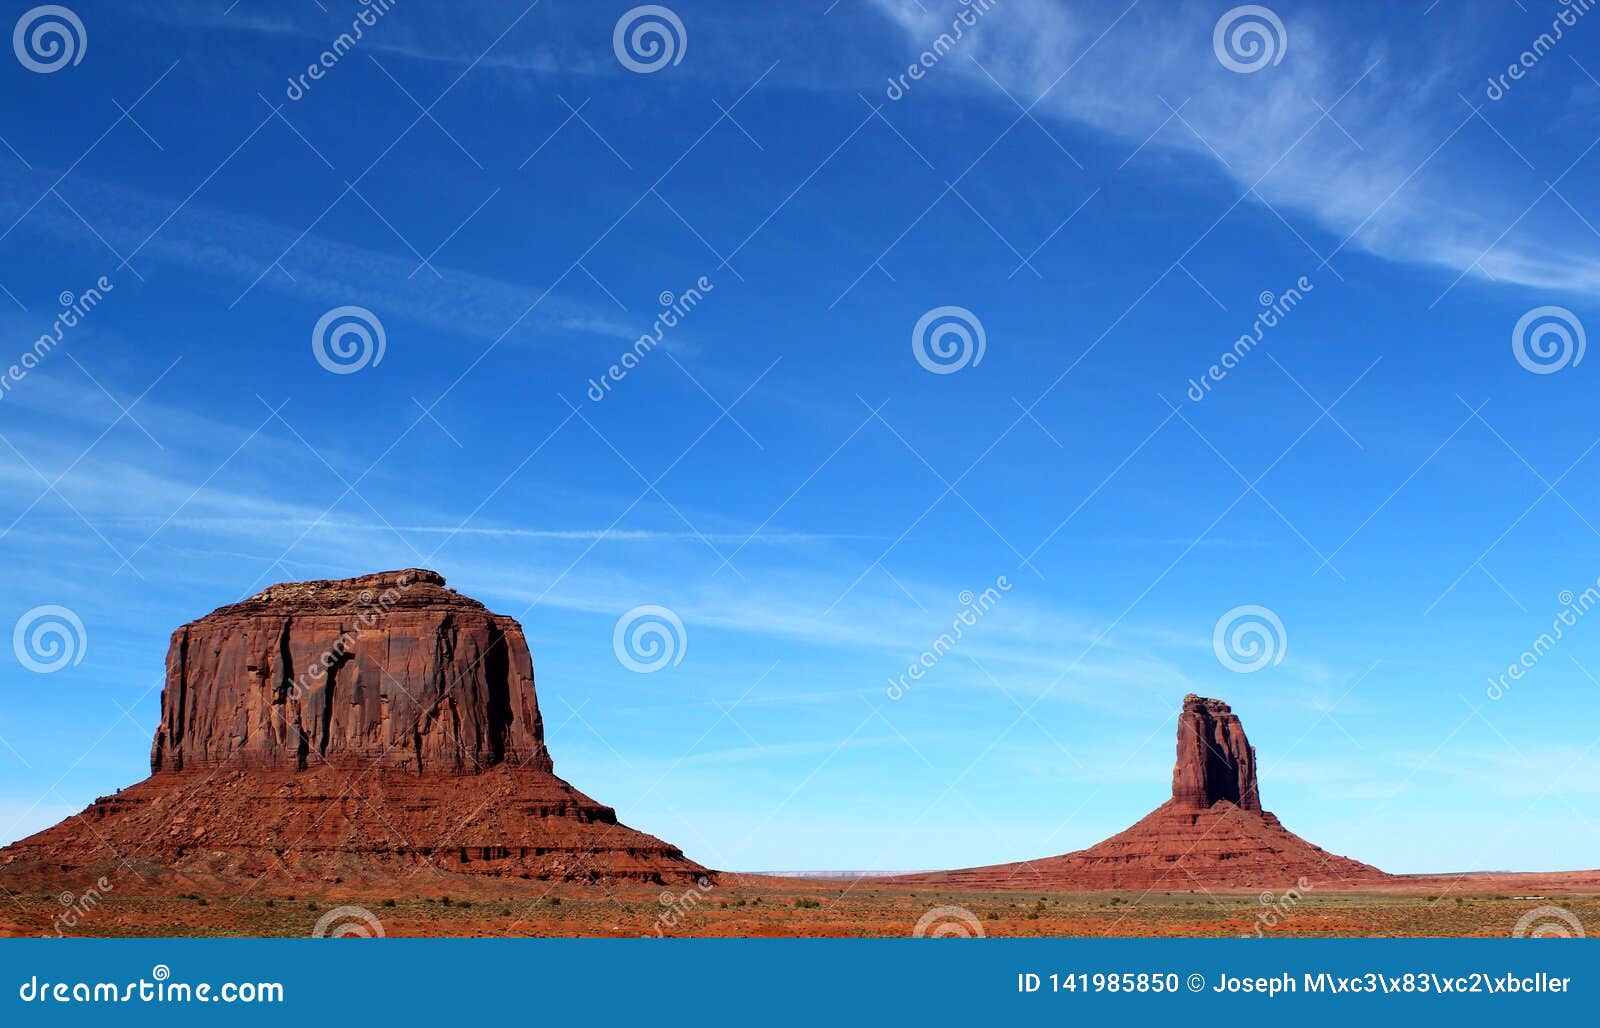 beautiful day in monument valley on the border between arizona and utah in united states - merrick butte